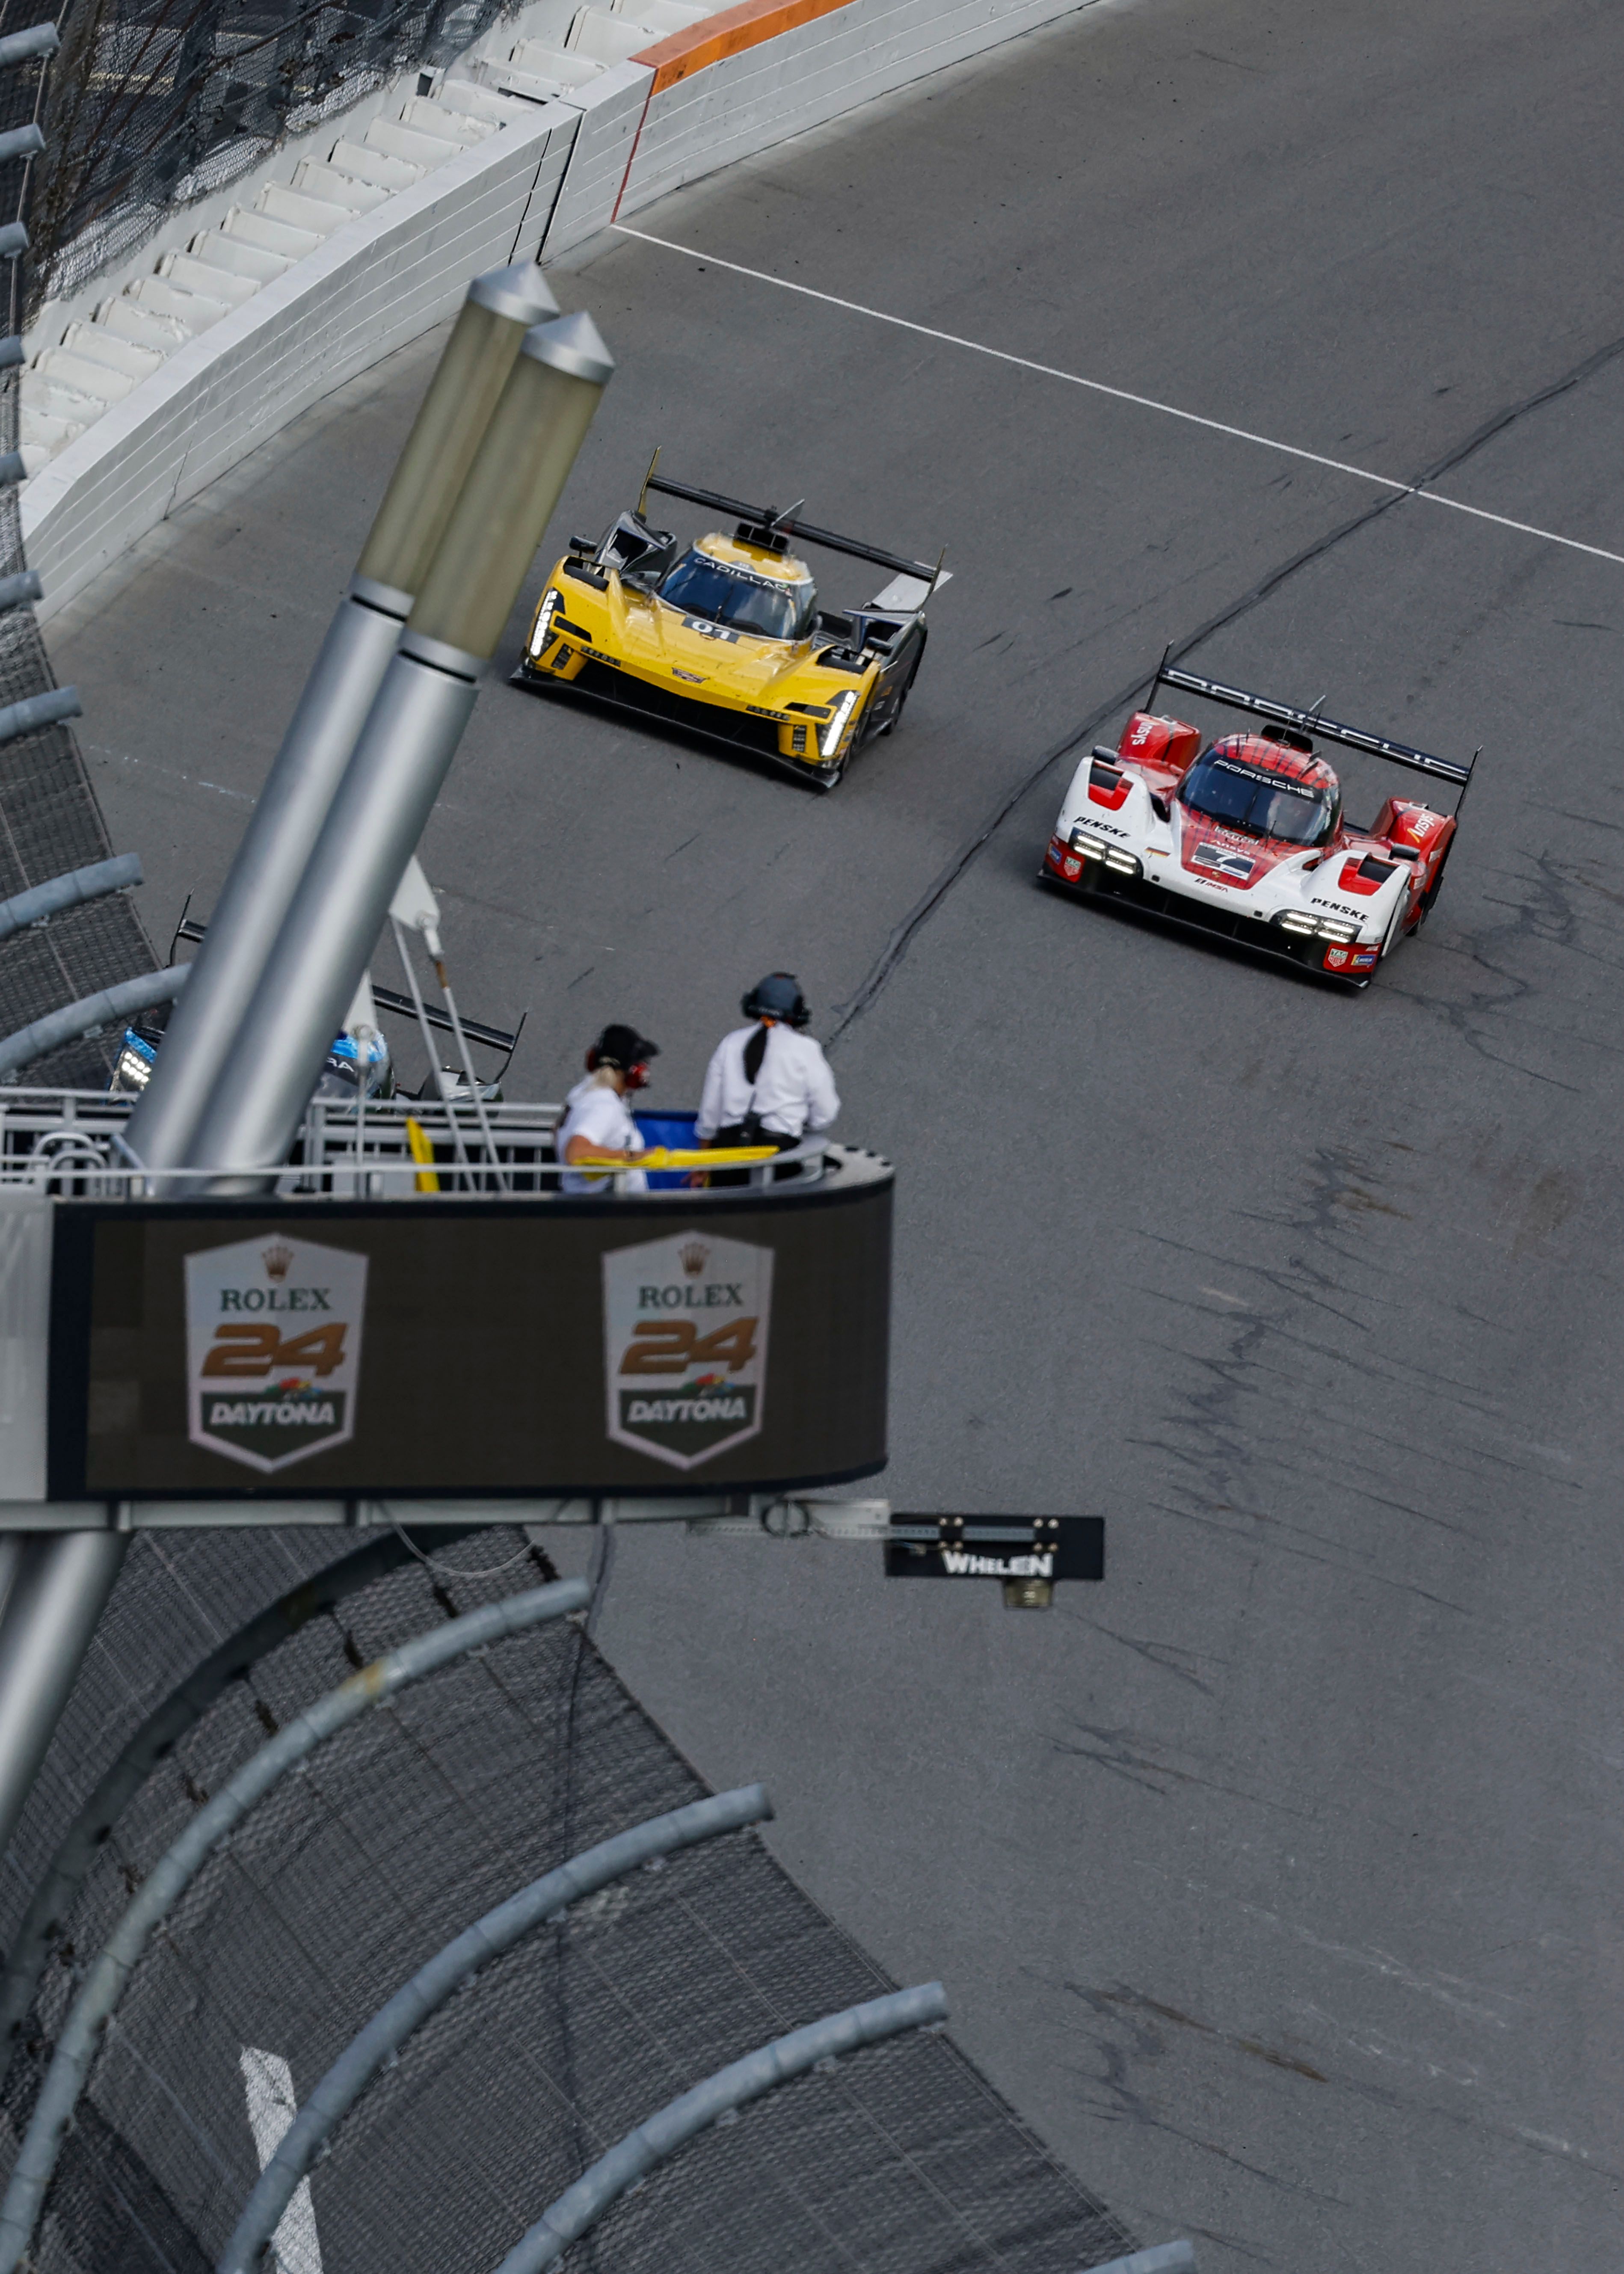 The 24 At Daytona came down to a side-by-side battle for the overall win